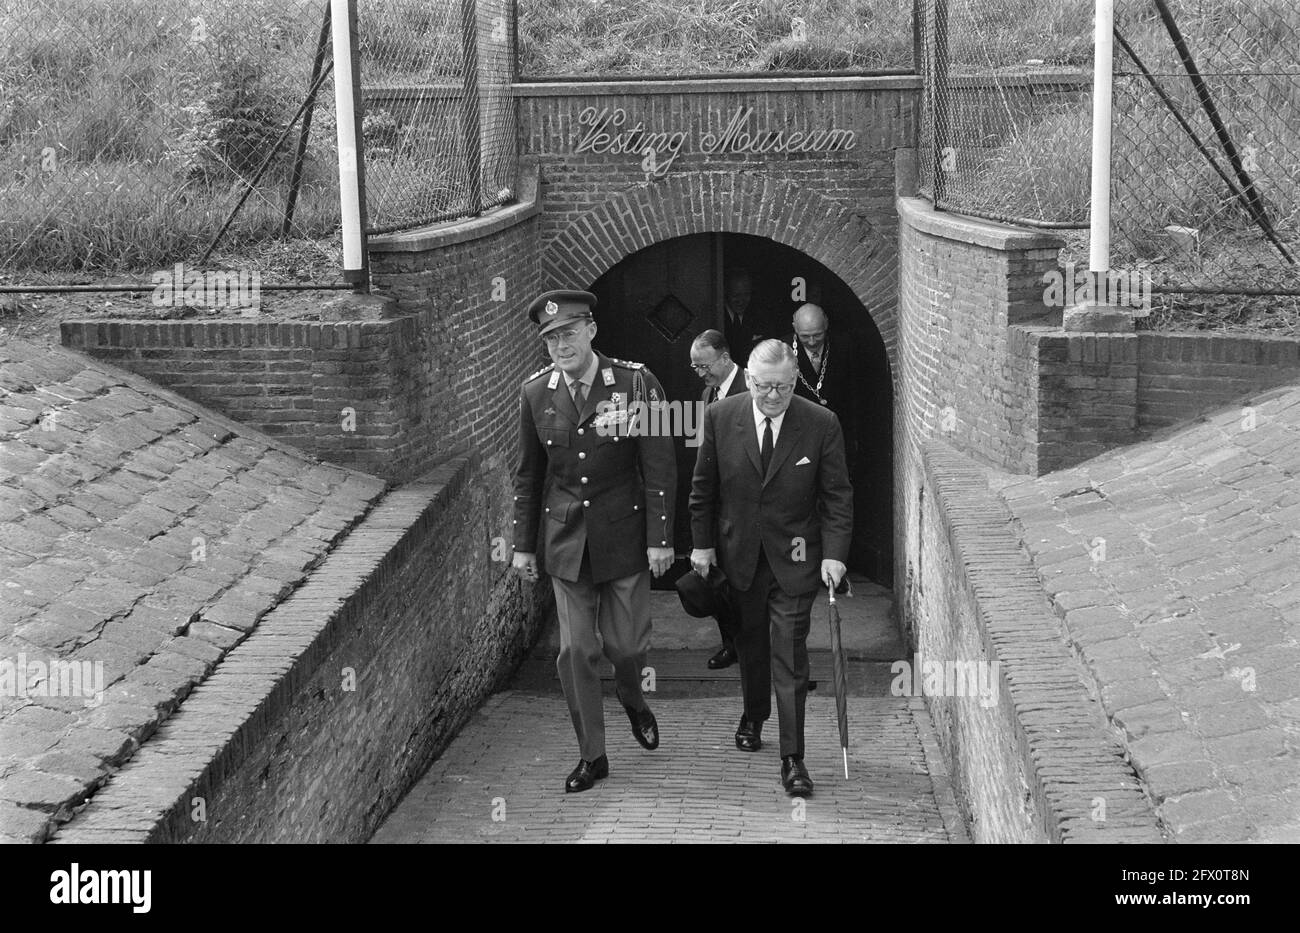 HRH Prince Bernhard opens expansion of the Fortress Museum in Naarden Prince Bernhard lights a fuse in a cannon, May 7, 1969, museums, openings, princes, The Netherlands, 20th century press agency photo, news to remember, documentary, historic photography 1945-1990, visual stories, human history of the Twentieth Century, capturing moments in time Stock Photo